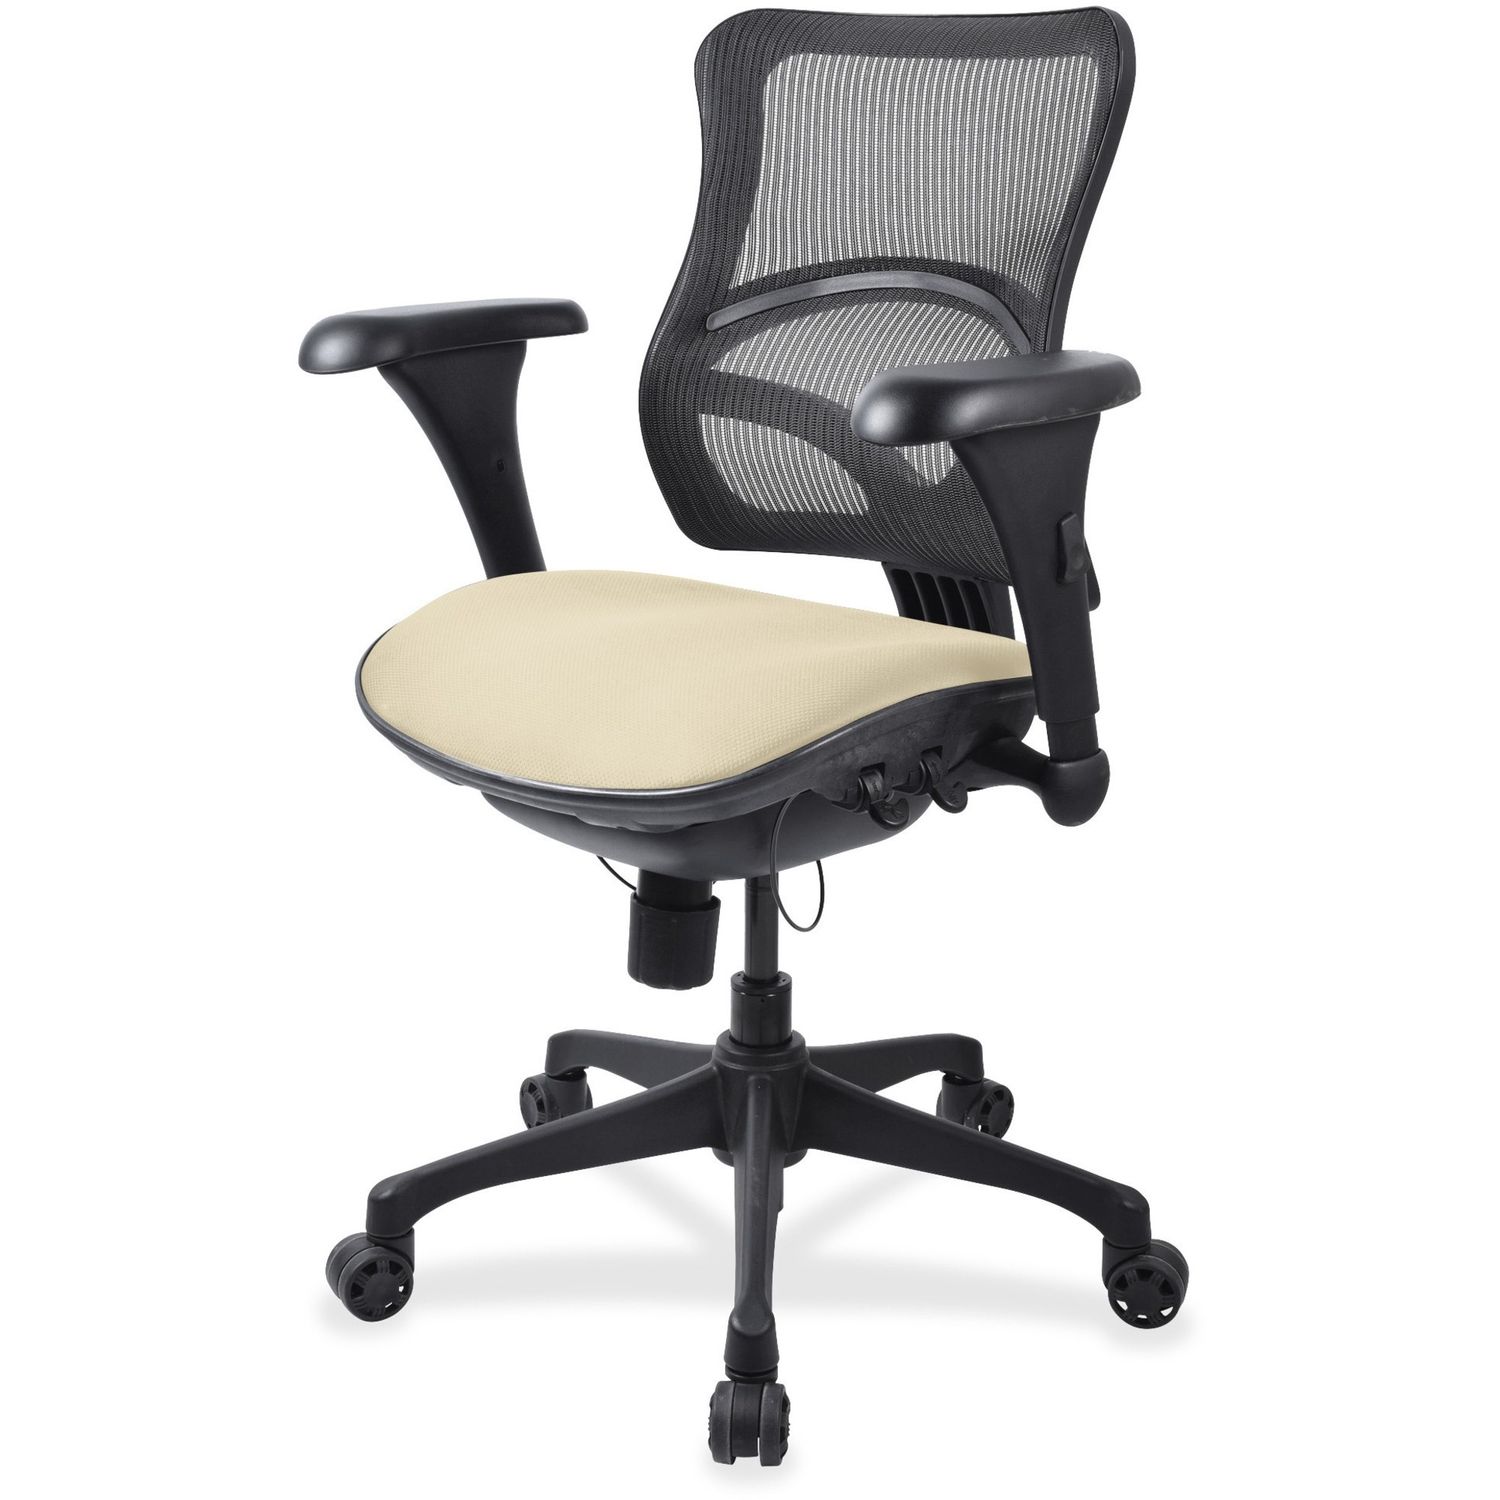 Mid-back Fabric Seat Chair Fabric Seat, Black Plastic Frame, Mid Back, 5-star Base, Beige, 1 Each